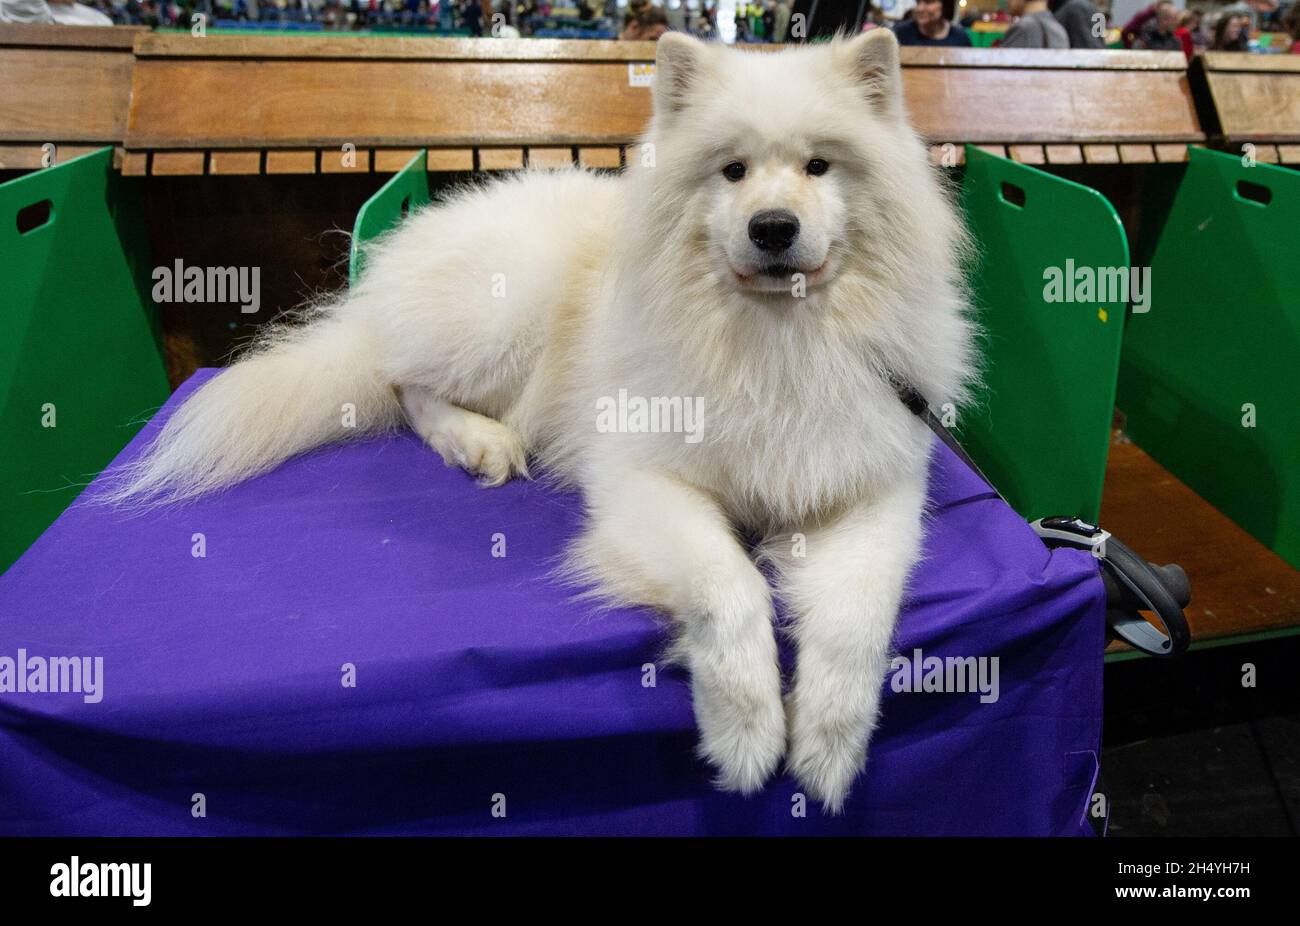 American Eskimo dog on day 3 of Crufts Dog Show at the National Exhibition Centre (NEC) on 09 March 2019 in Birmingham, England. Picture date: Saturday 09 March, 2019. Photo credit: Katja Ogrin/ EMPICS Entertainment. Stock Photo